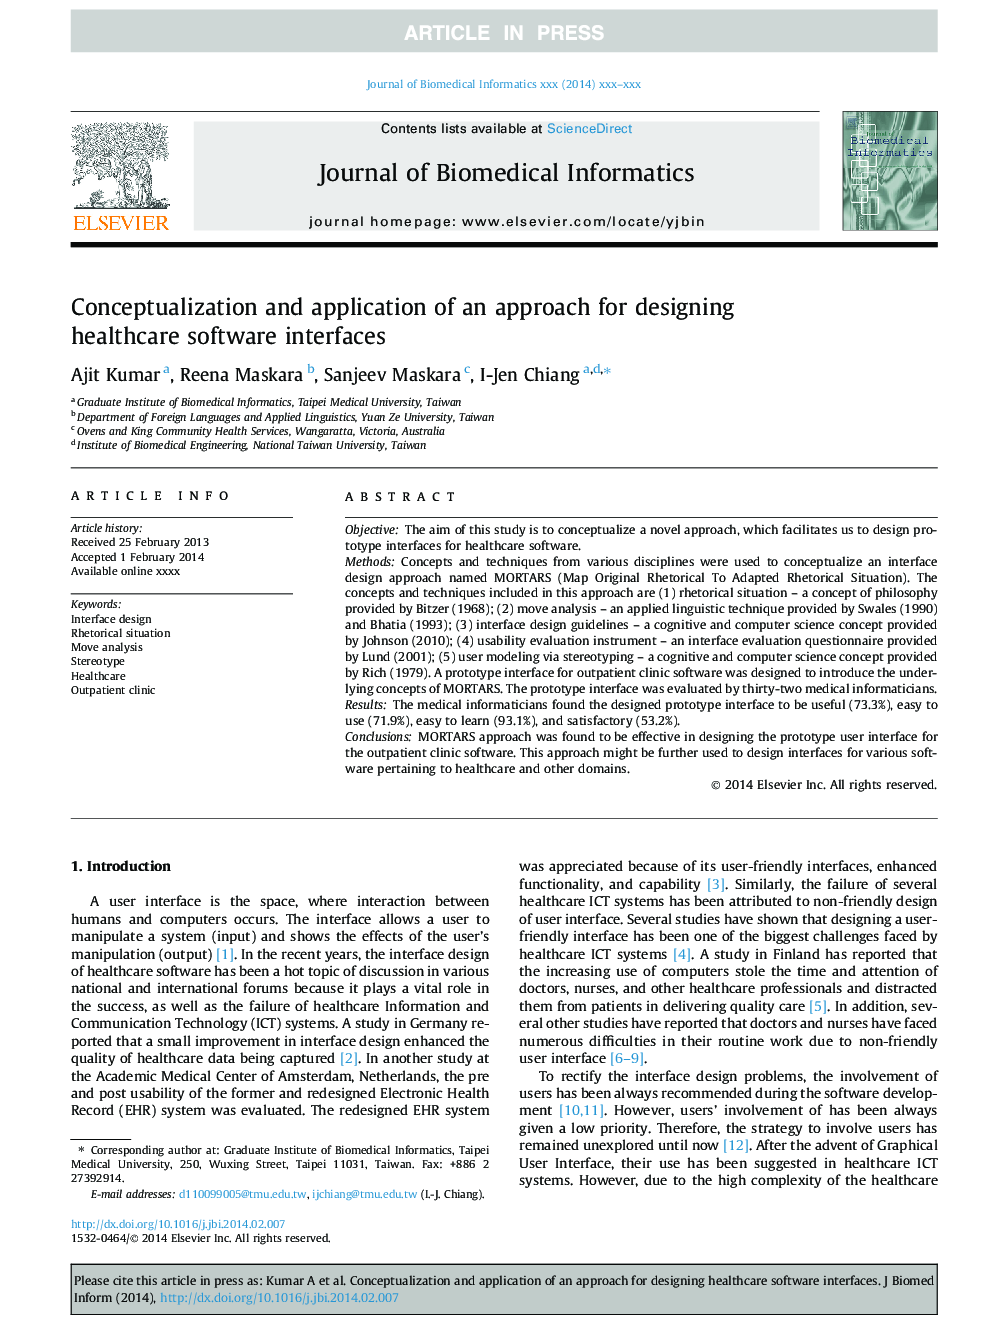 Conceptualization and application of an approach for designing healthcare software interfaces